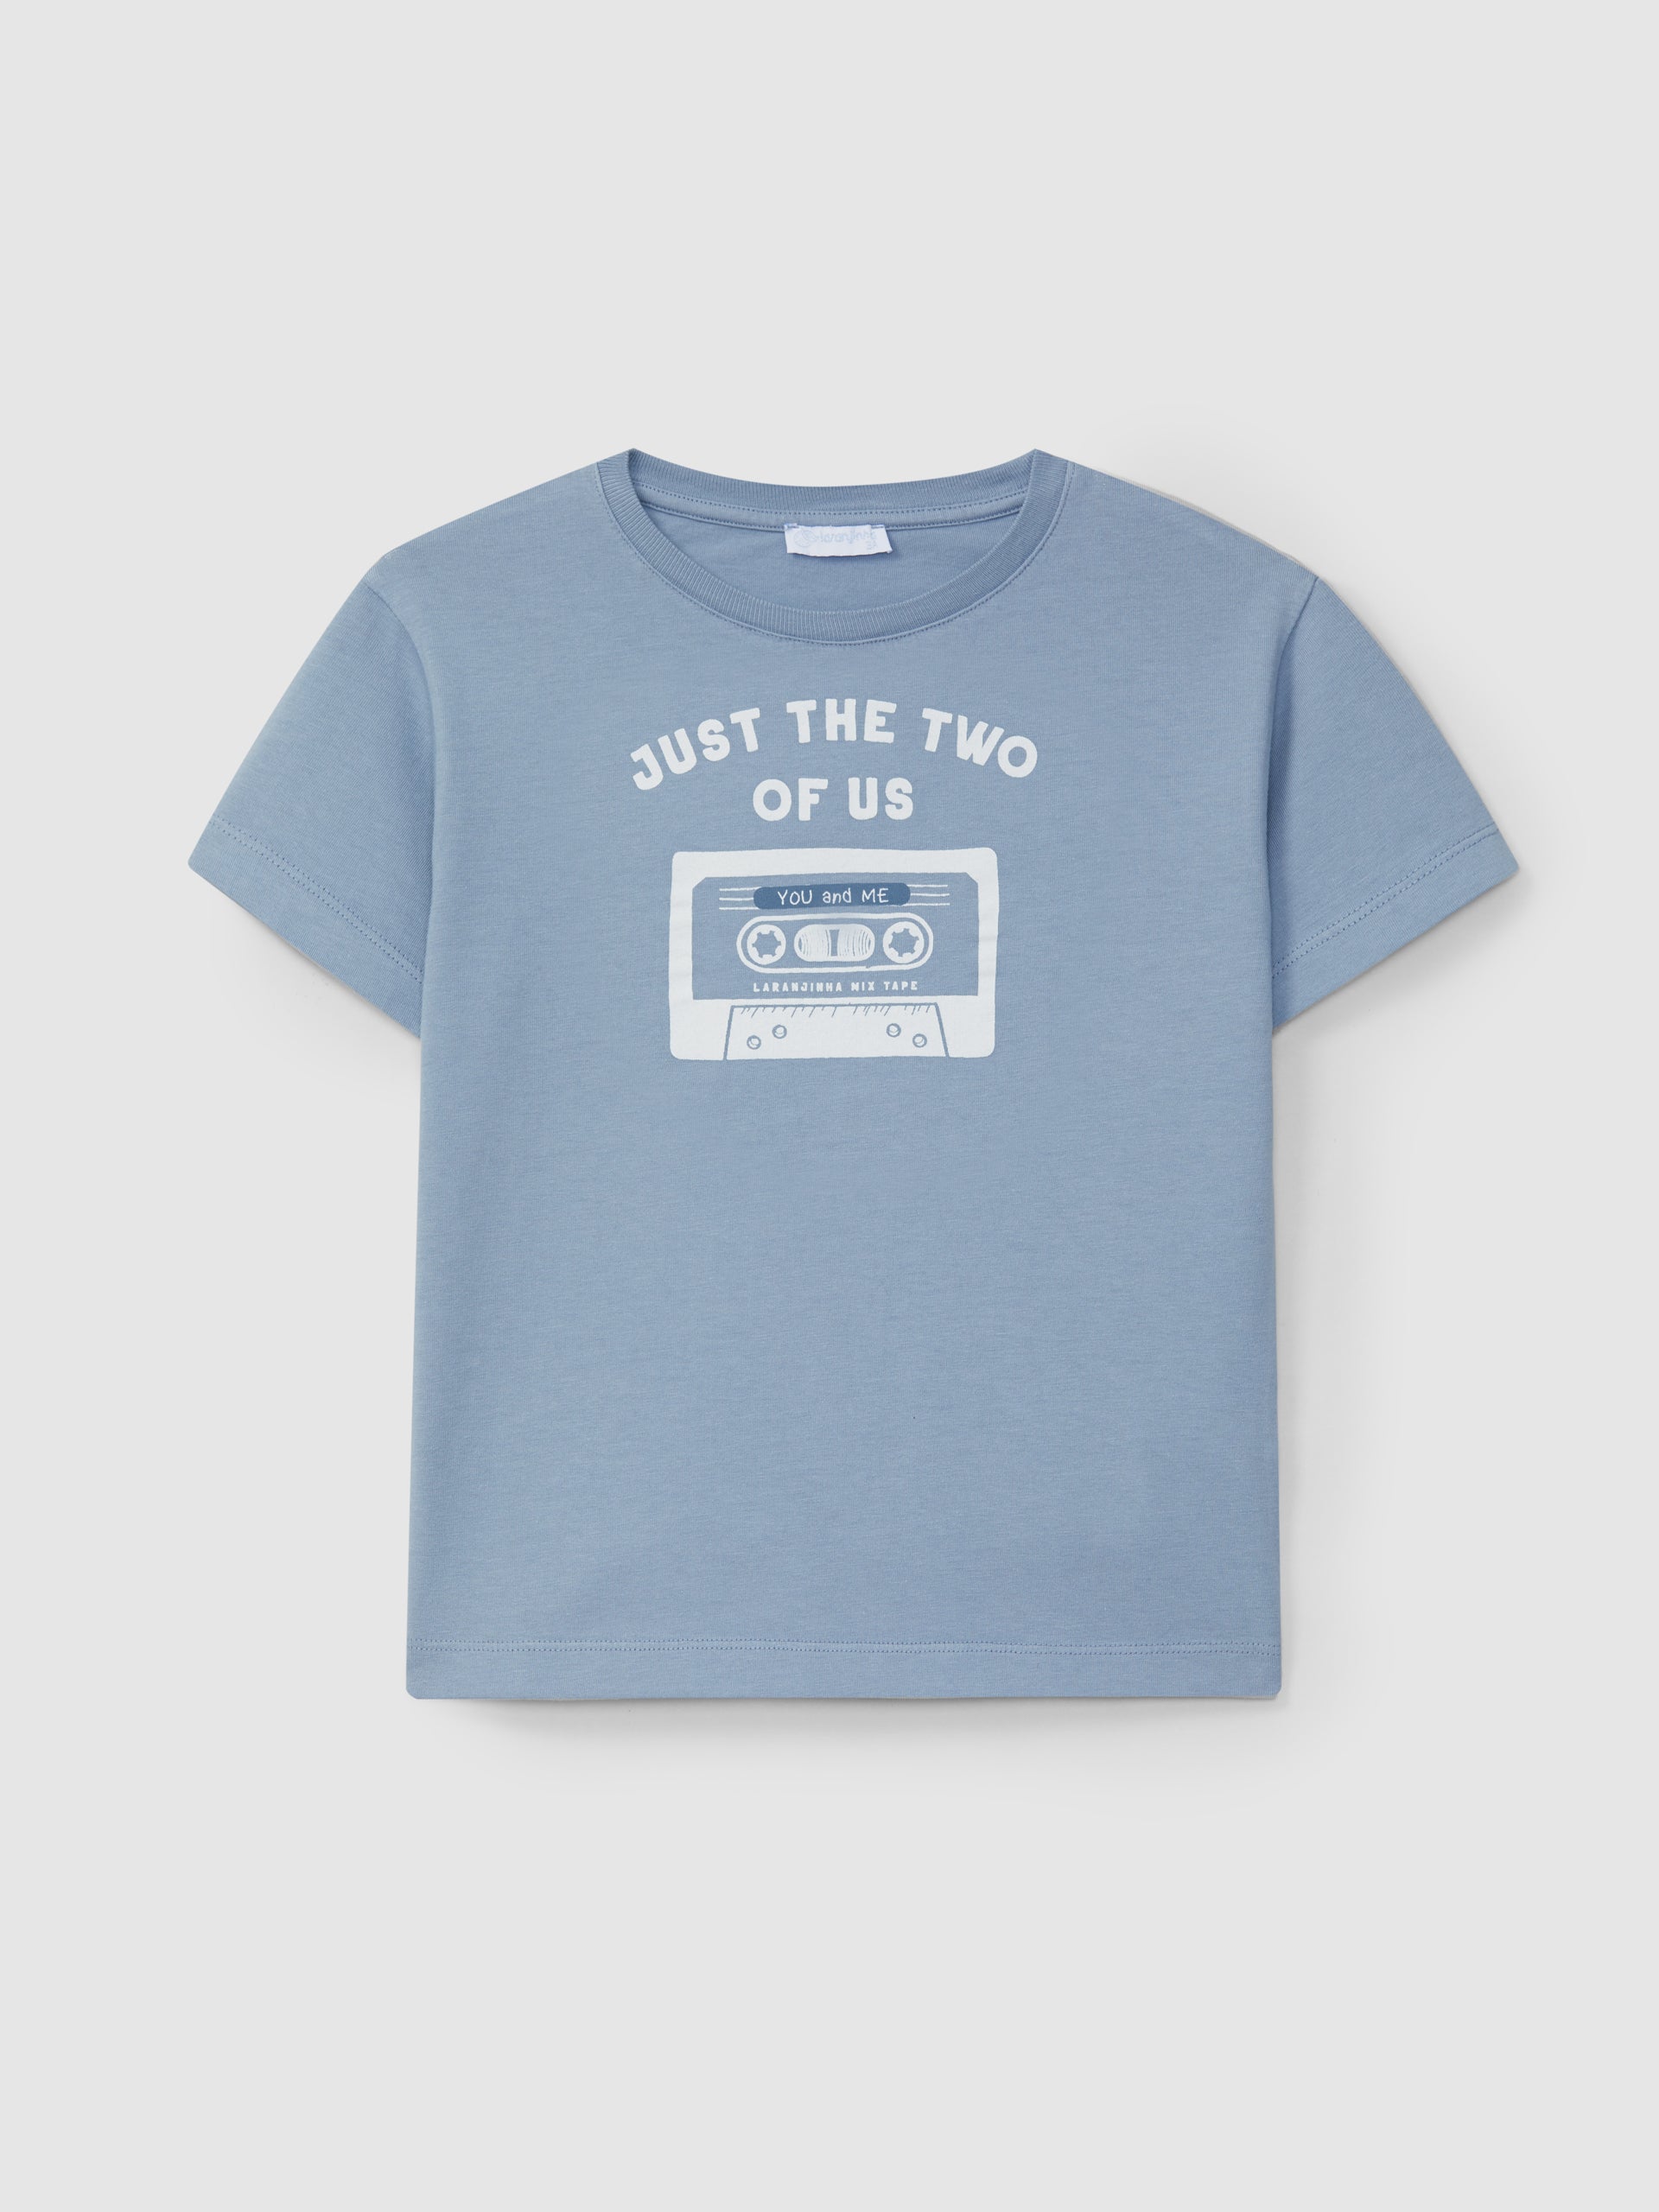 T-SHIRT « JUST THE TWO OF US »